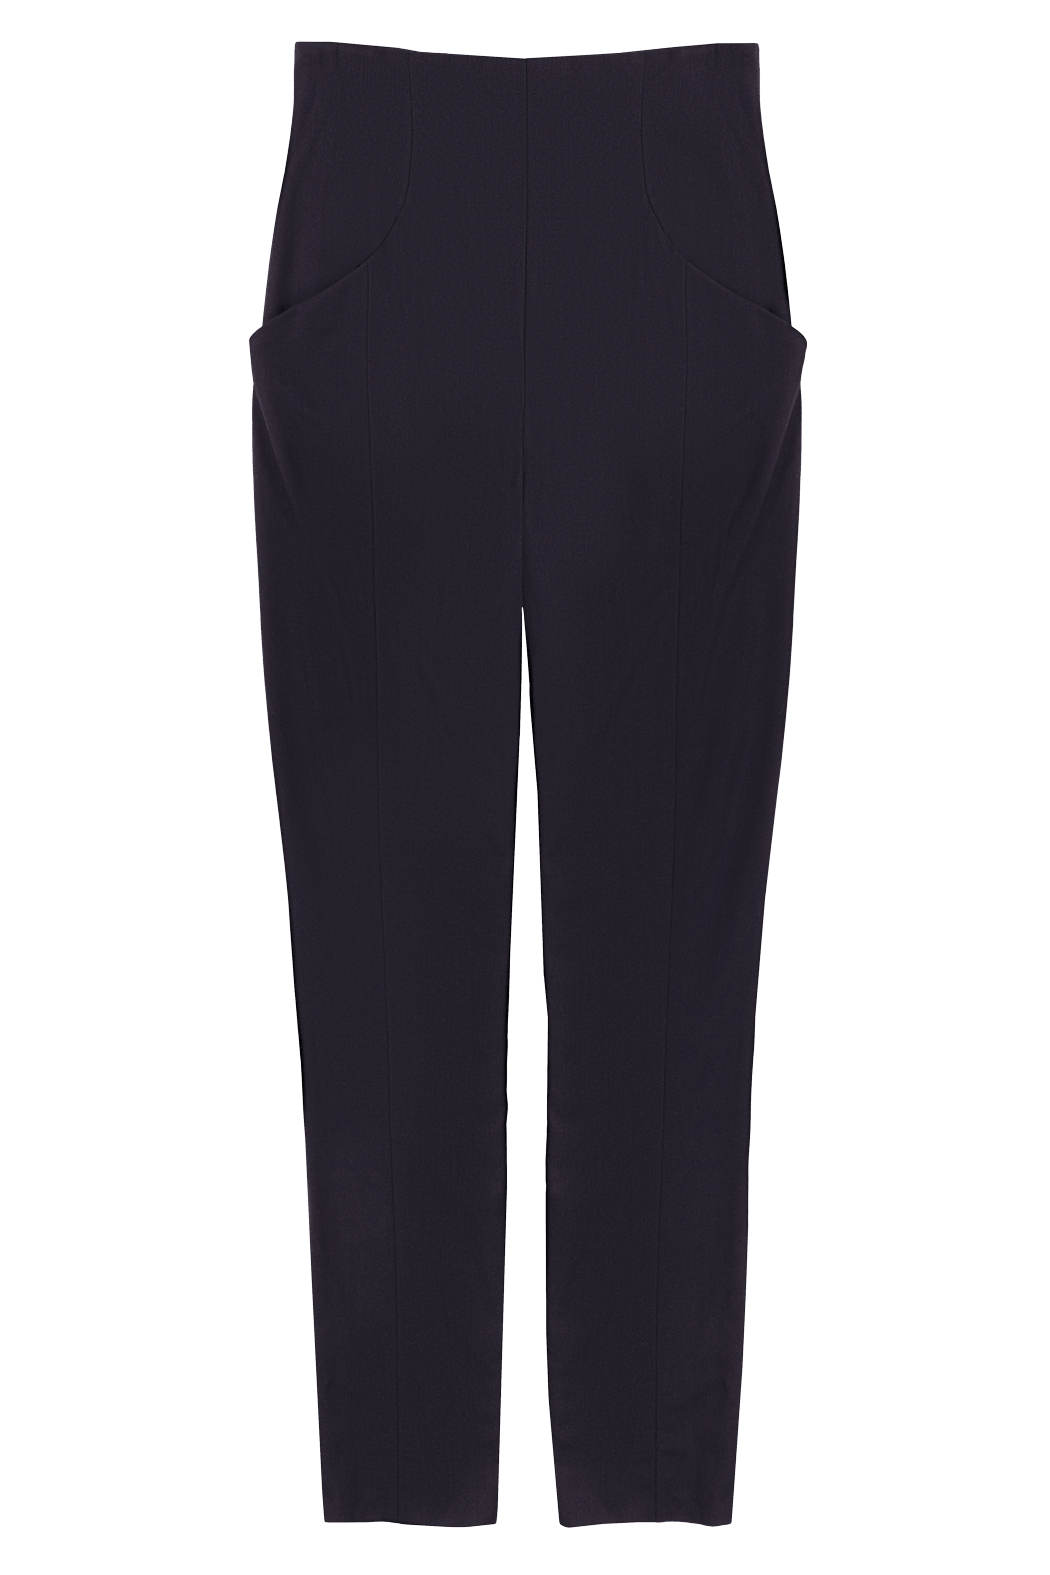 Plus Size Black Elasticated Tapered Stretch Trousers